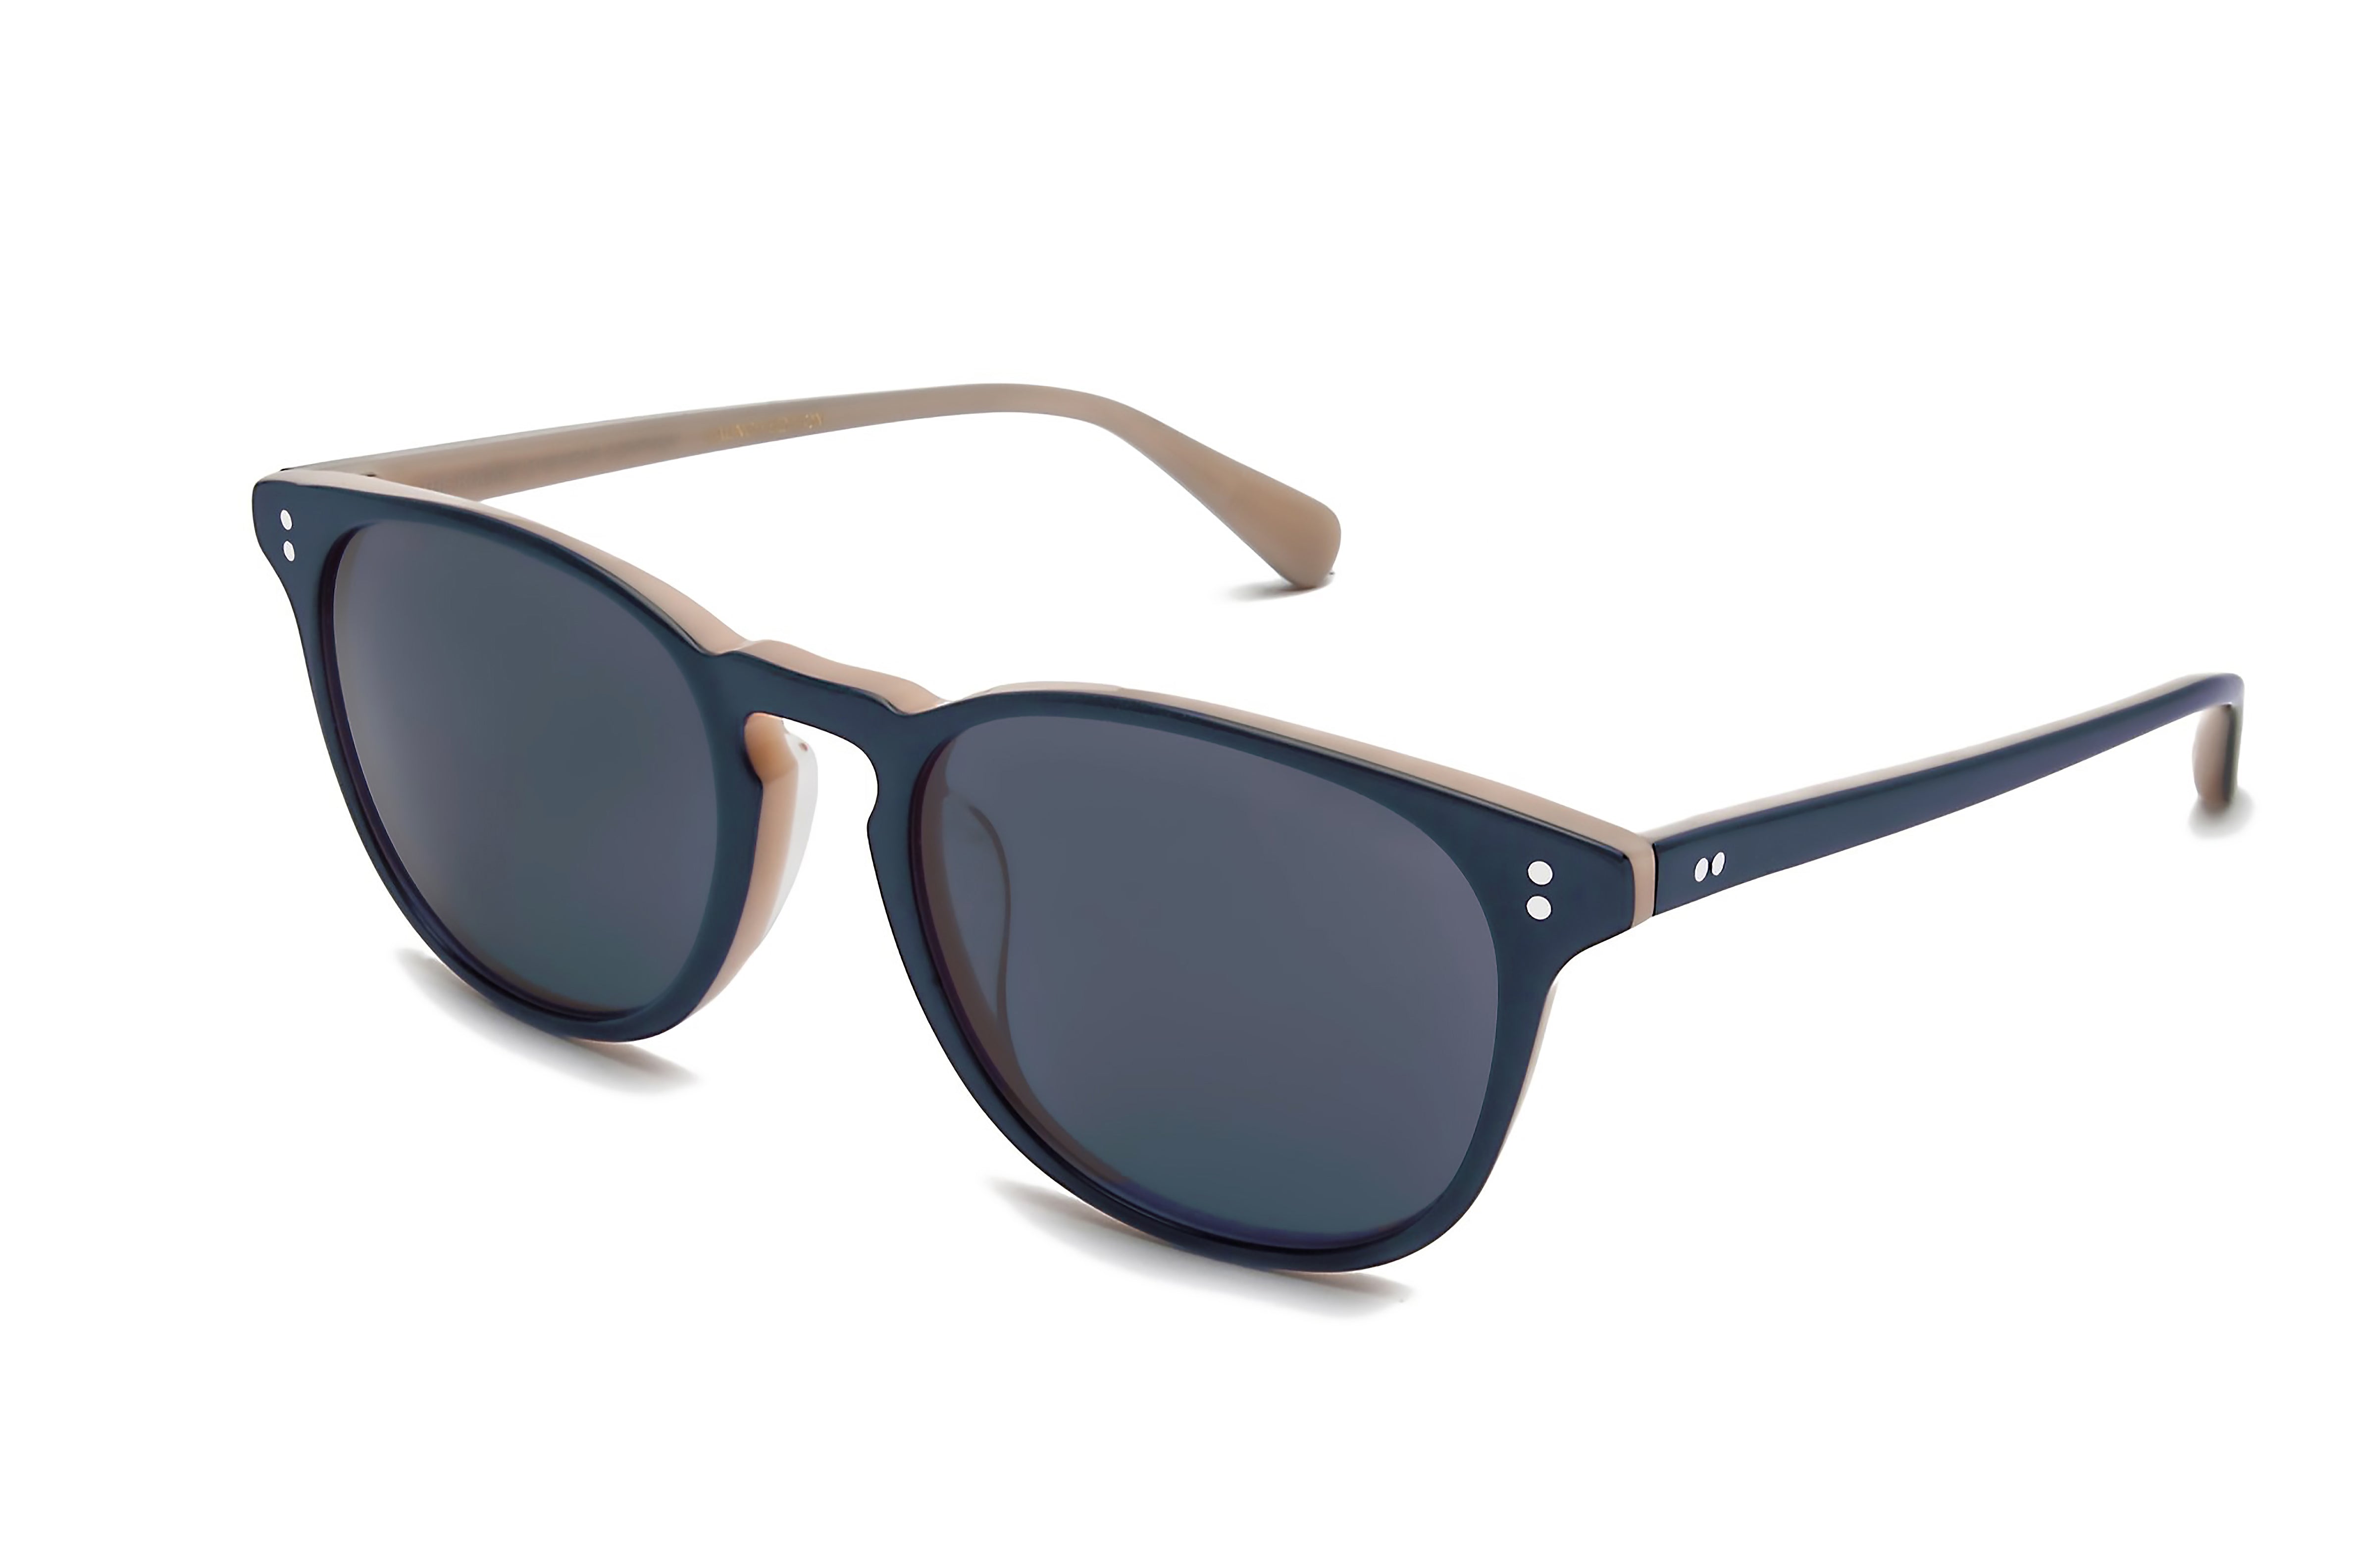 Rocket MTO P3 Classic Midnight Blue/Peach with Blue Polarized Lenses (Launch Edition)